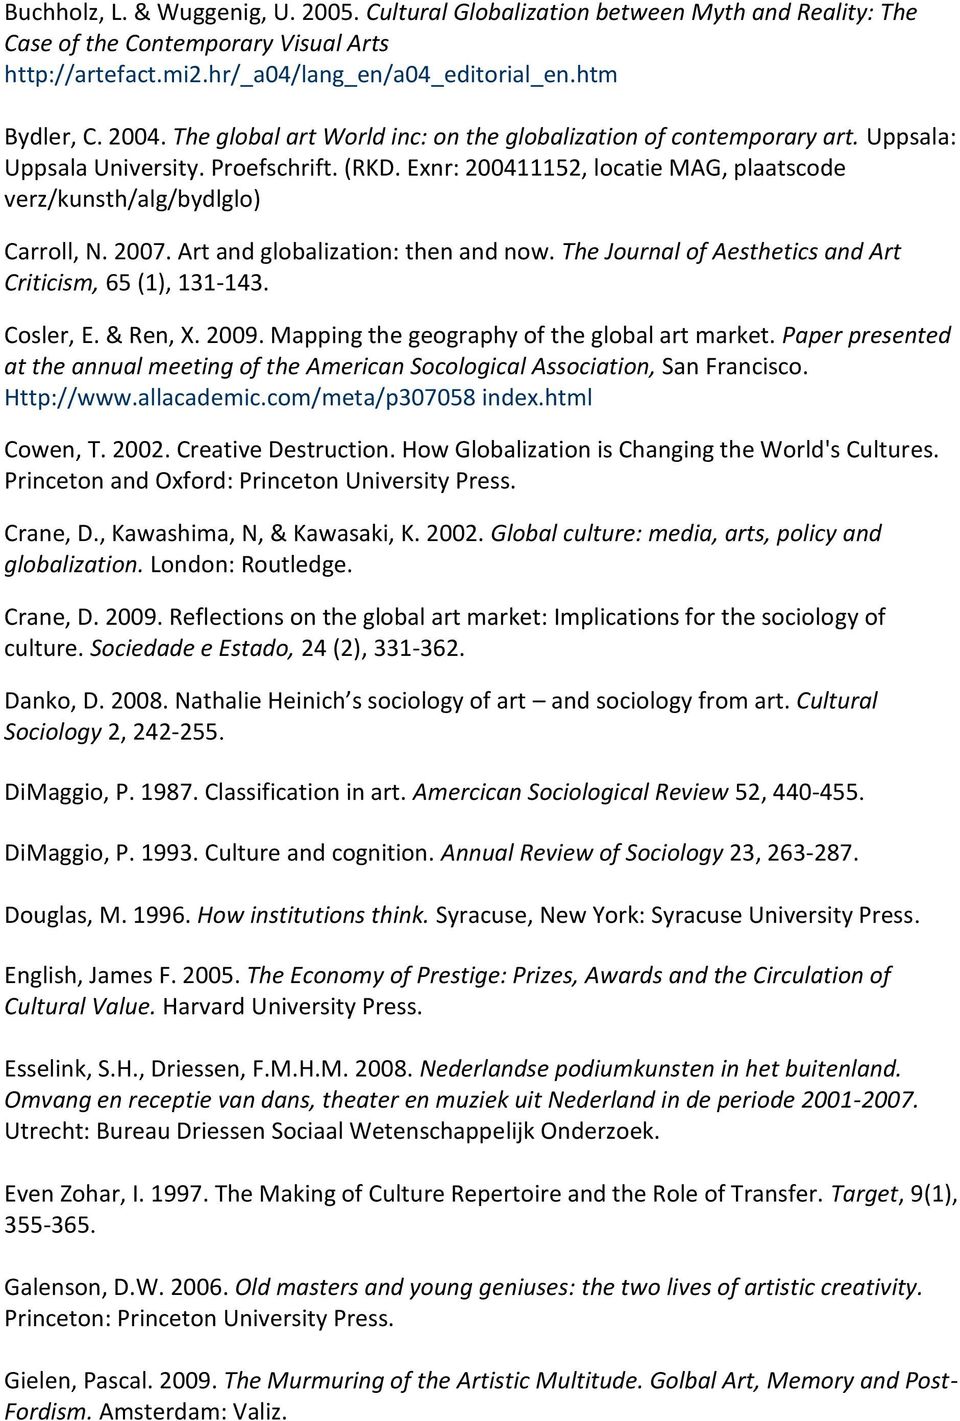 Art and globalization: then and now. The Journal of Aesthetics and Art Criticism, 65 (1), 131-143. Cosler, E. & Ren, X. 2009. Mapping the geography of the global art market.